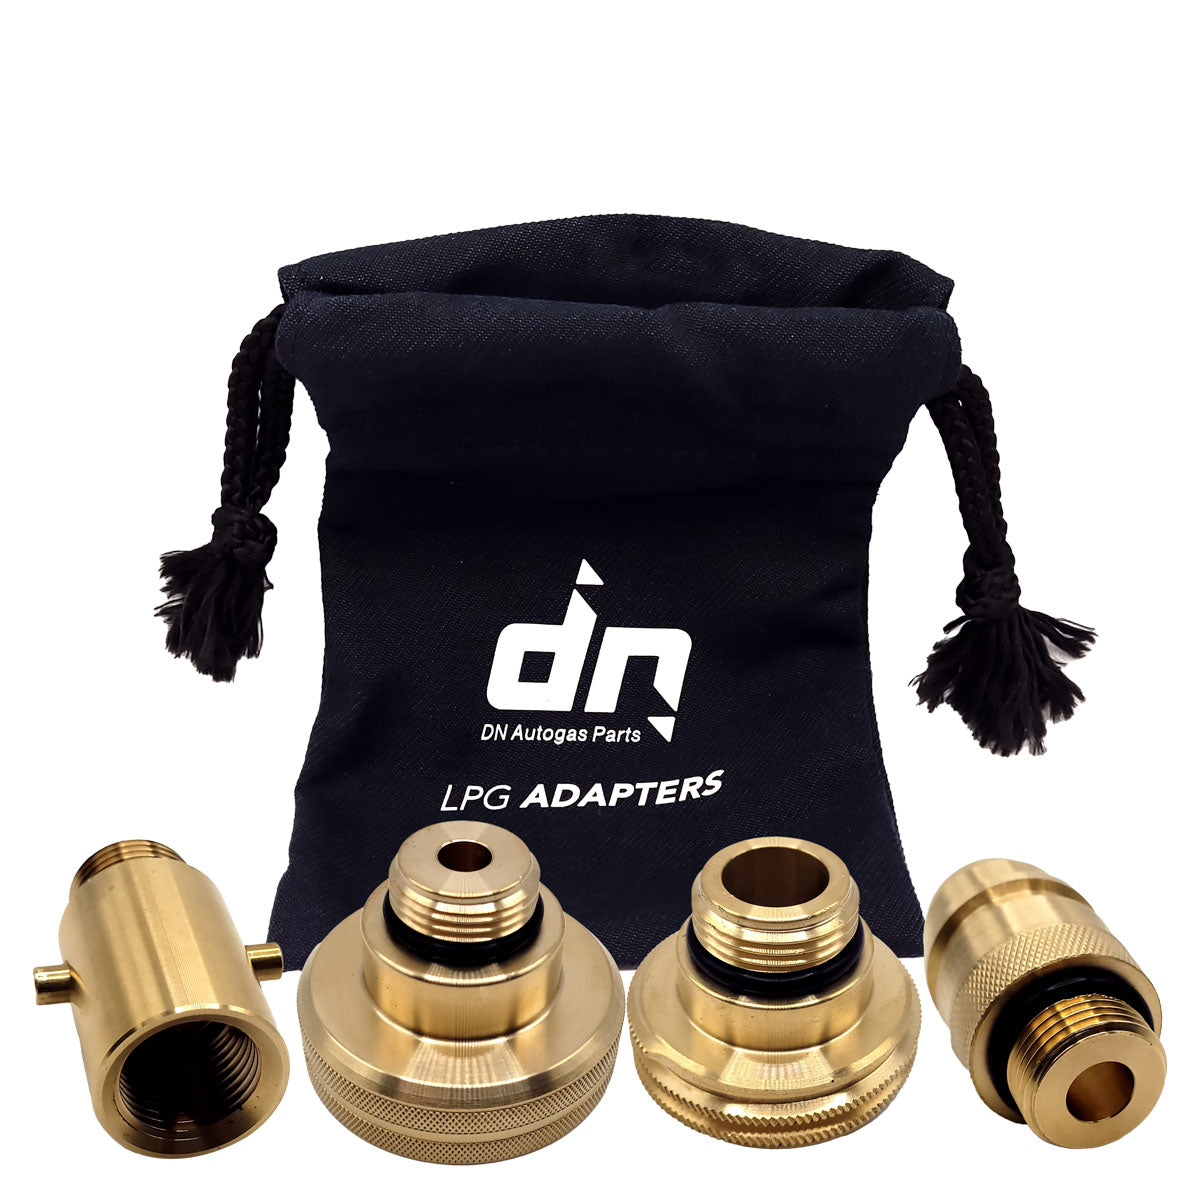 LPG GPL Autogas Tank Refill Adapter Set M22 for All Europe ACME DISH EURONOZZLE BAYONET with Bag